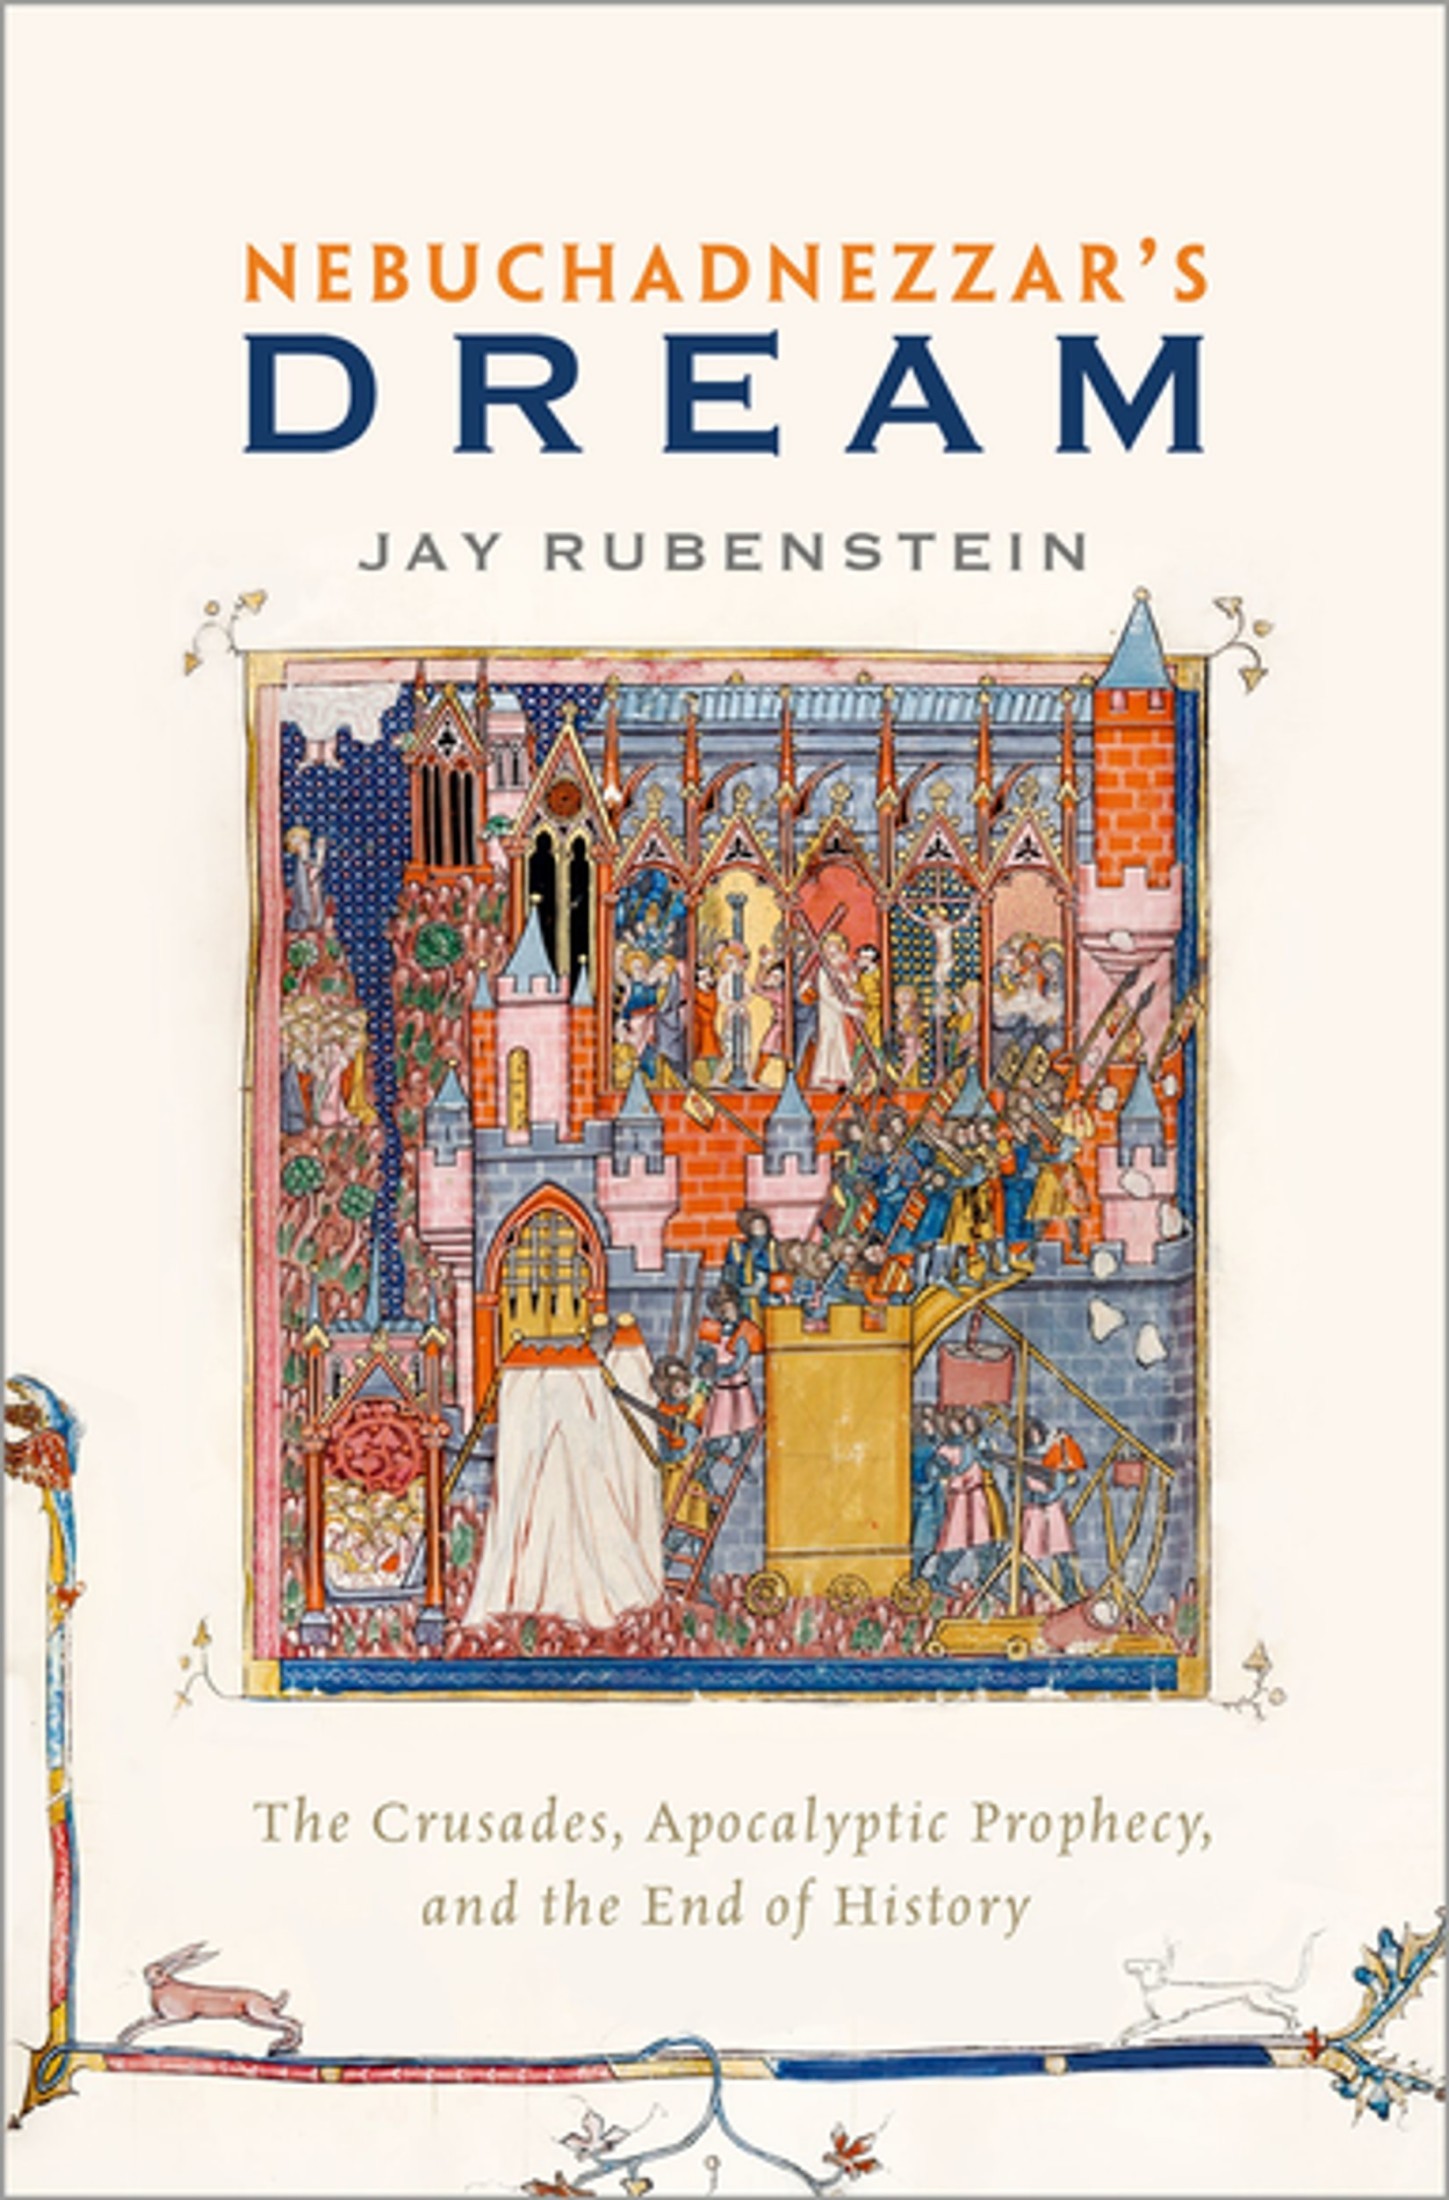 Nebuchadnezzar's Dream: The Crusades, Apocalyptic Prophecy, and the End of History